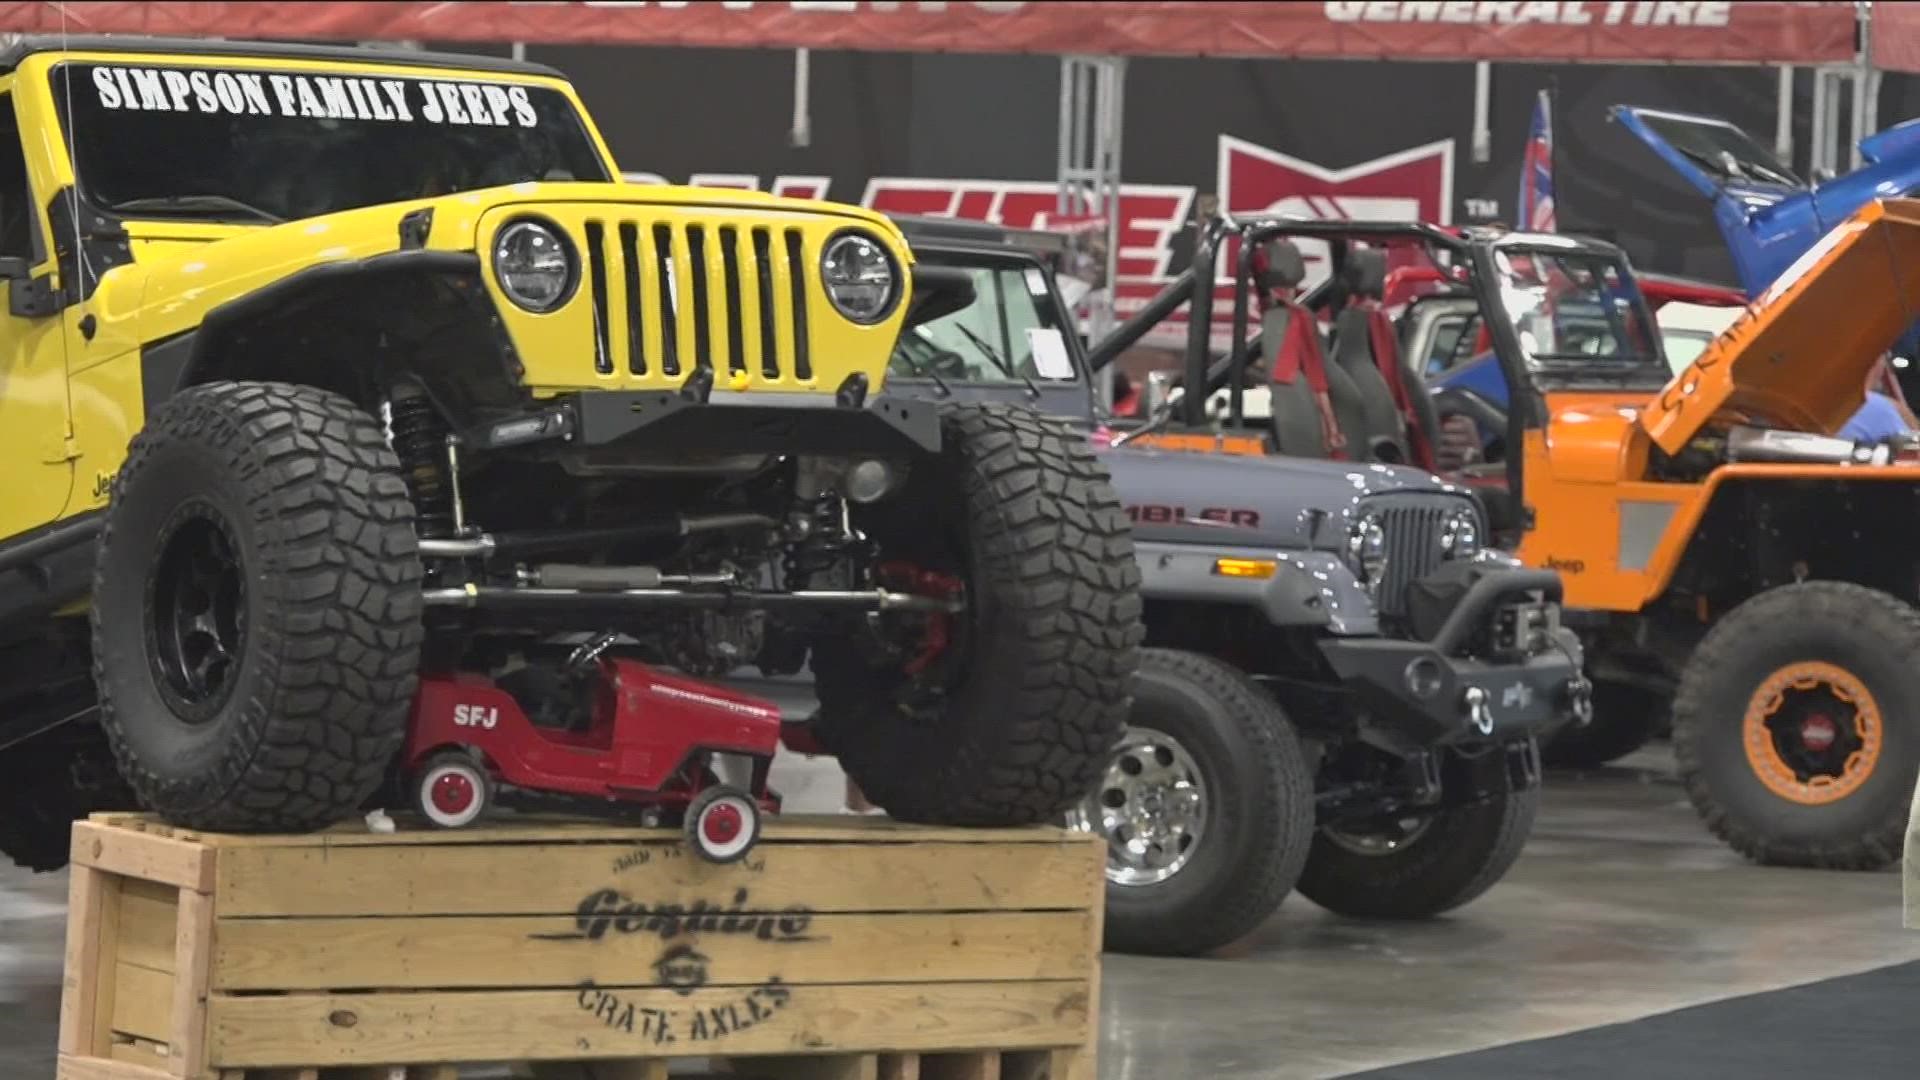 The 2022 Jeep Fest doesn't just bring in Jeeps. Organizers say it brings in big business to the community. Last year brought over $6 million for the economy.